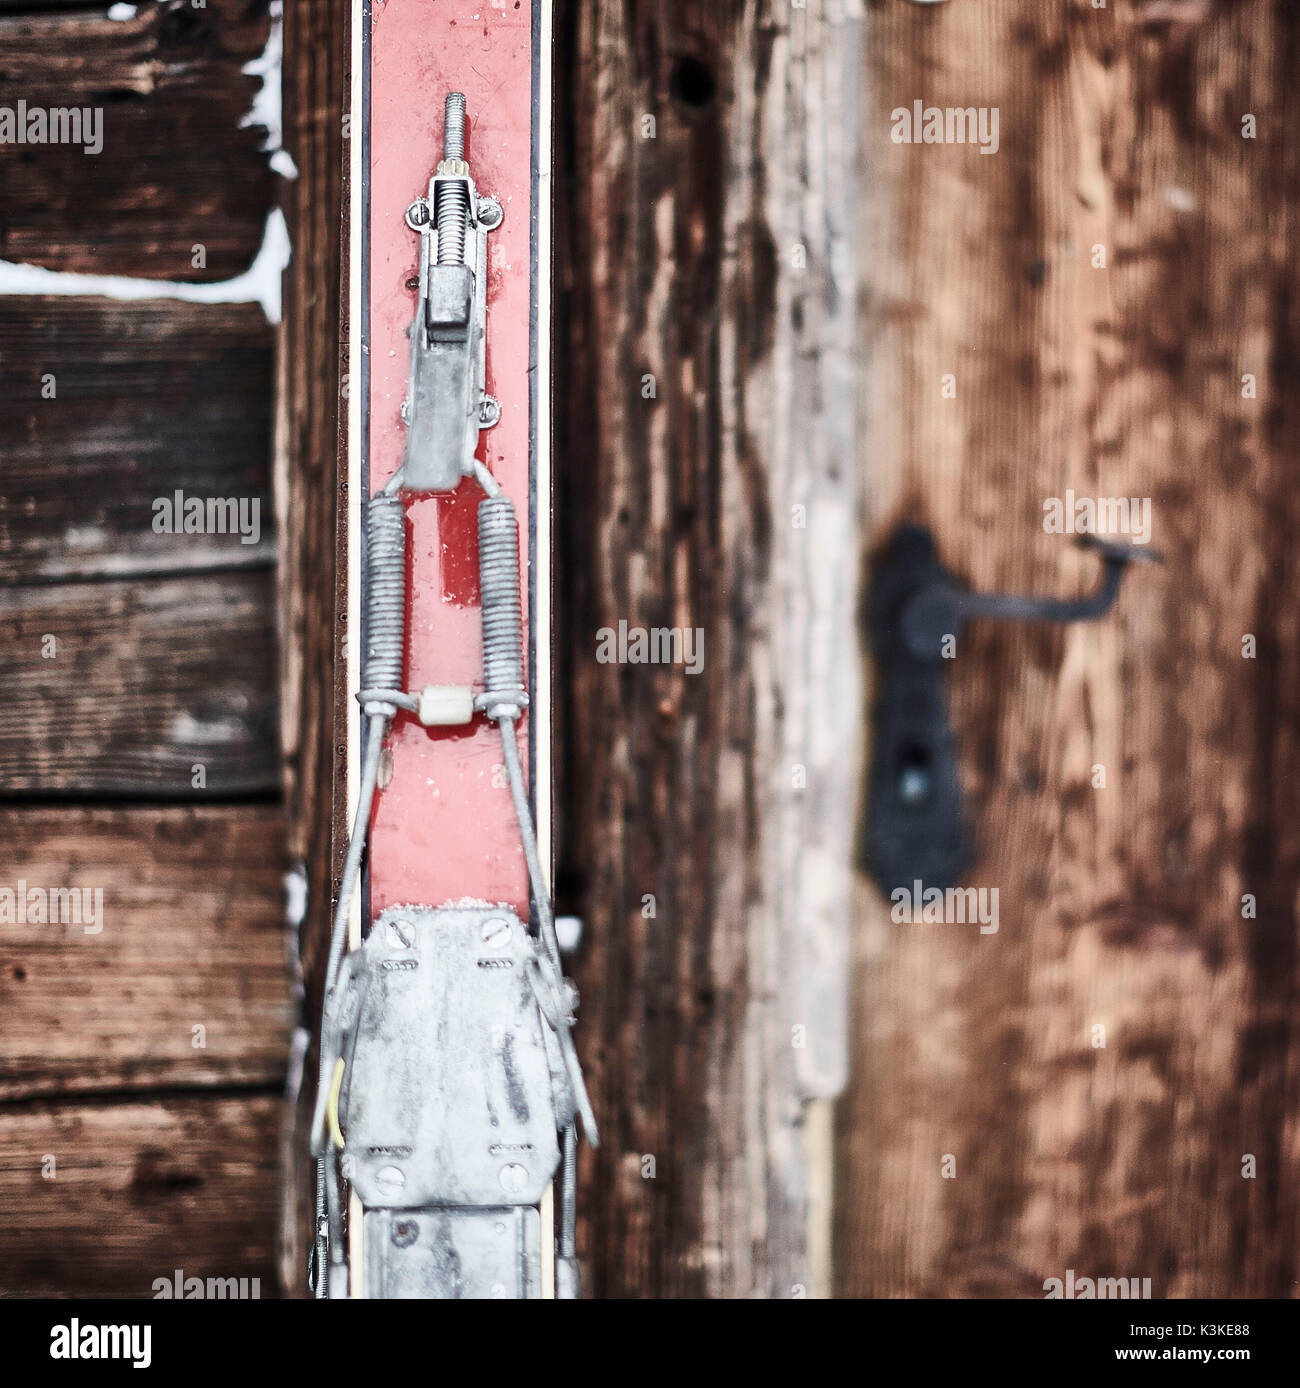 old red skis in front of old wooden door Stock Photo